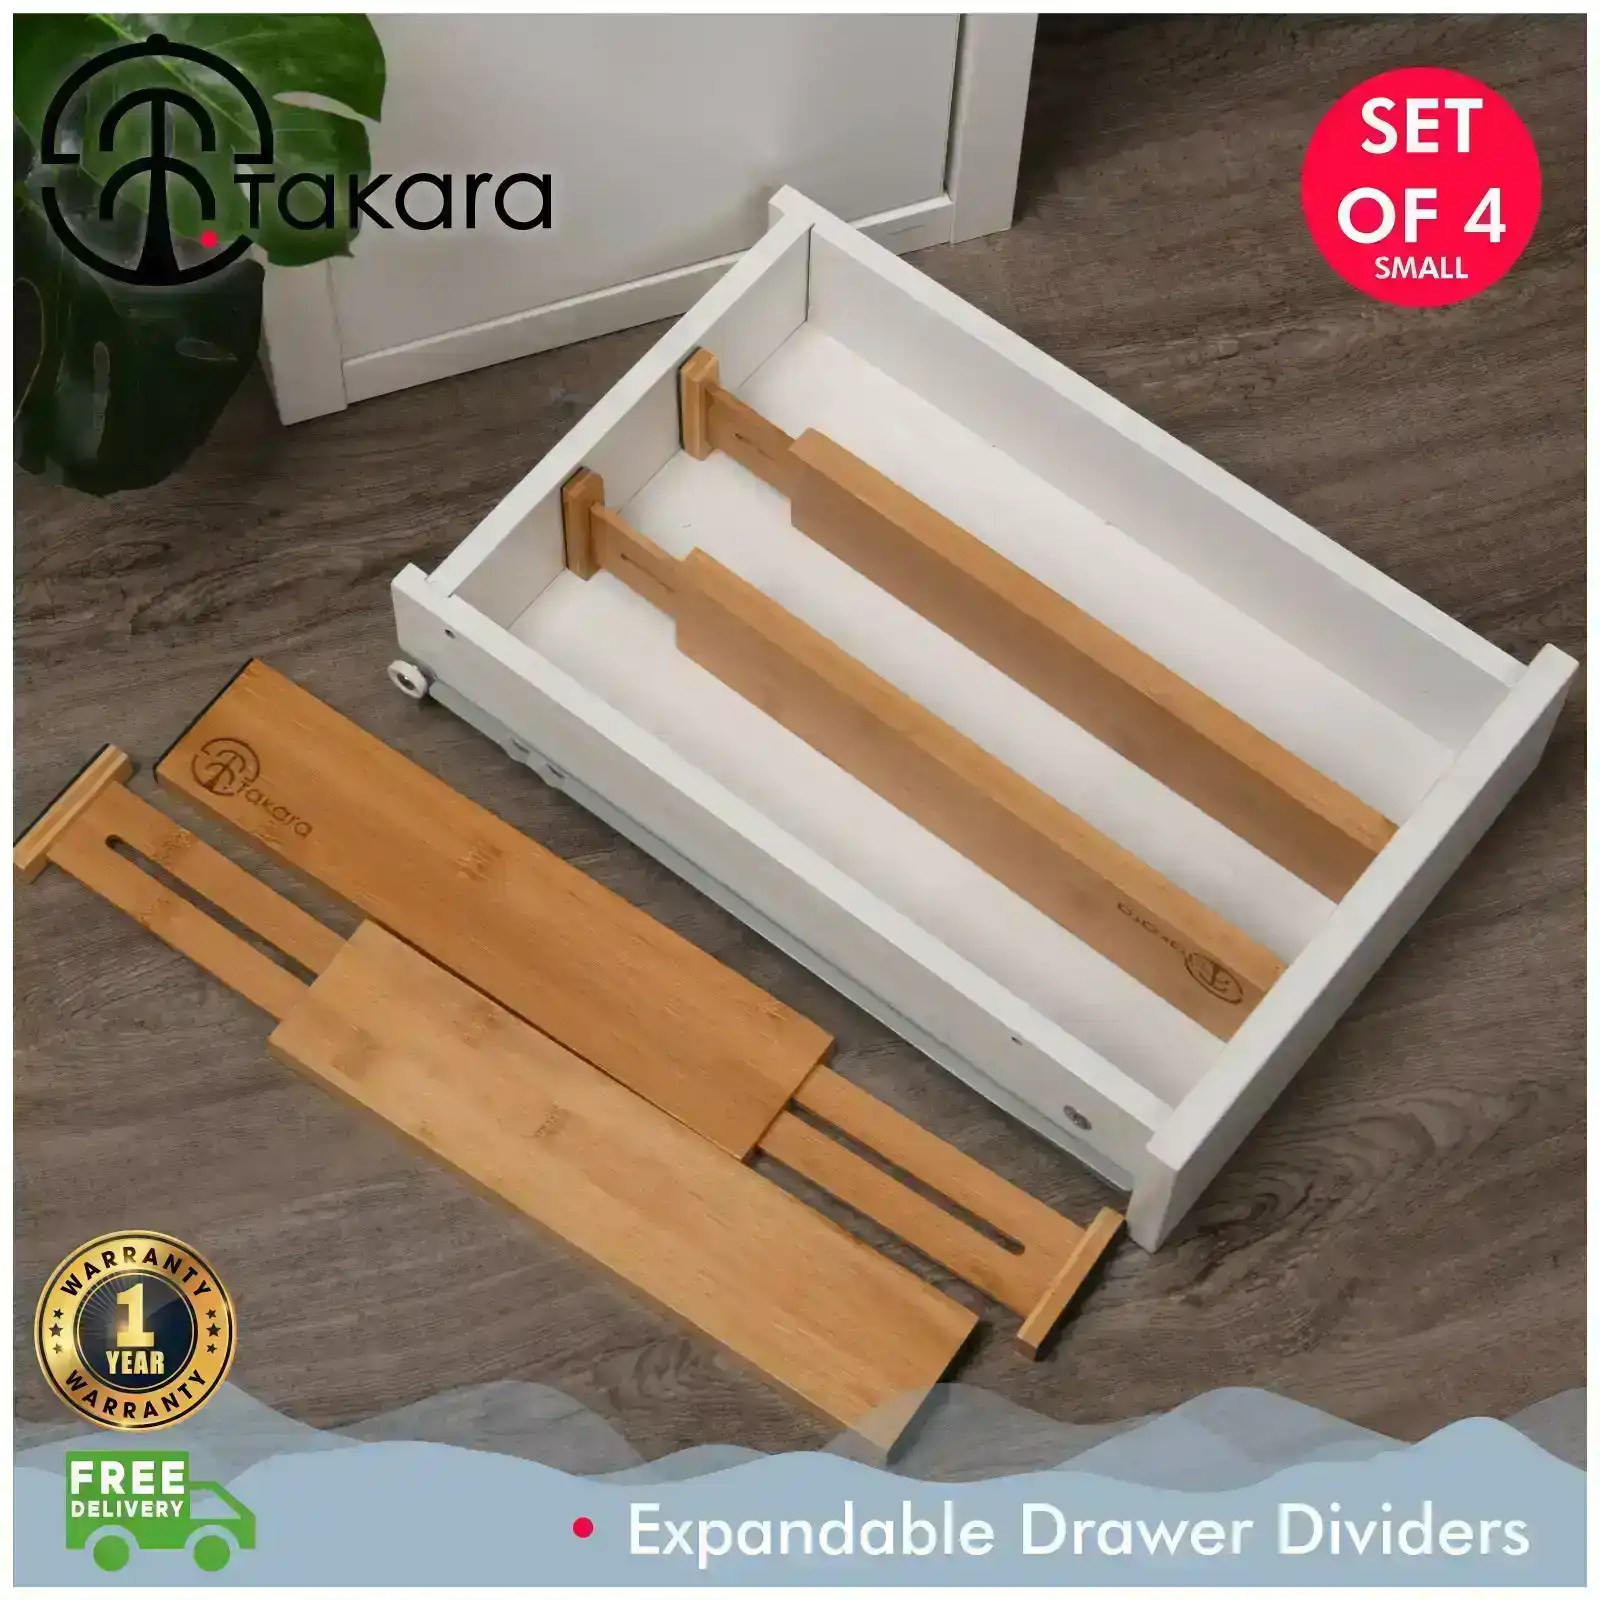 Takara Expandable Drawer Dividers Set-of-4 Small 31-44x6.5x1.6cm